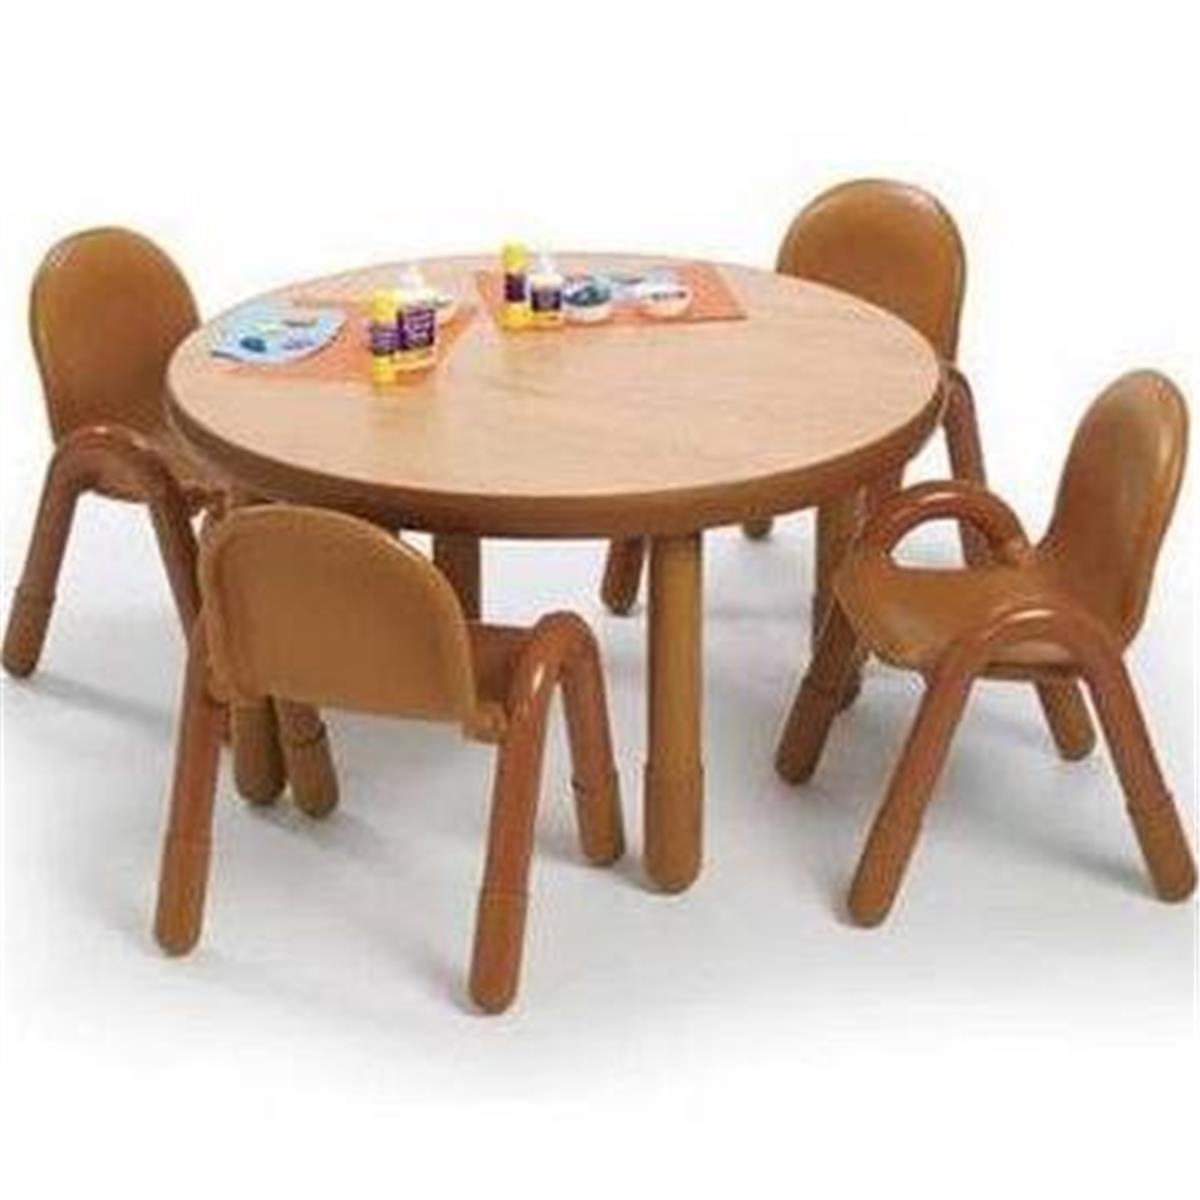 Angeles Ab74920nw1 36 In. Dia. Round Preschool Table With 20 In. Legs & 4-11 In. Chairs, Natural